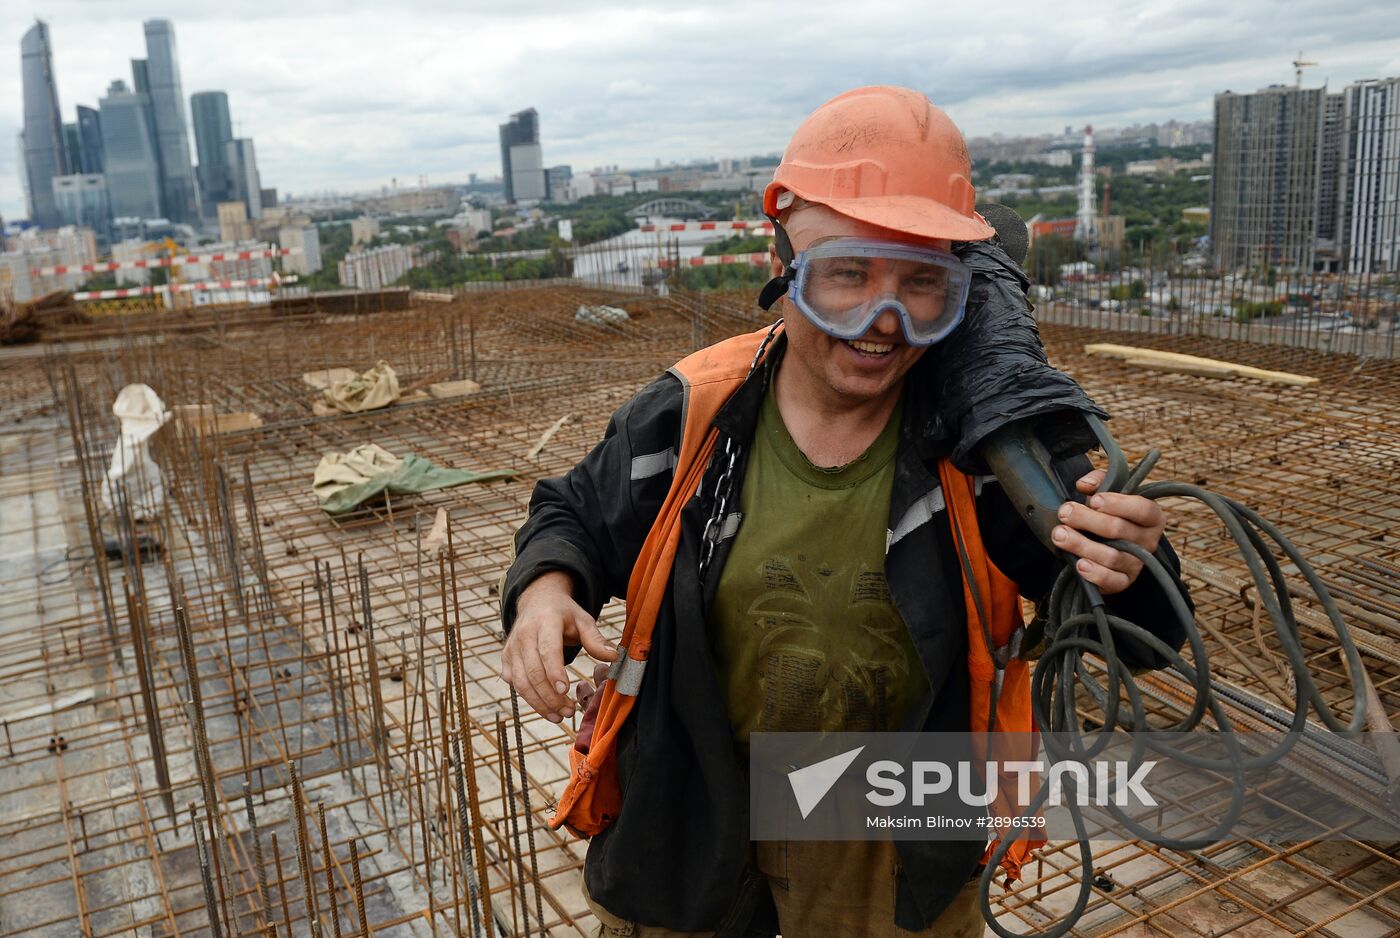 Construction of new residential buildings in Moscow